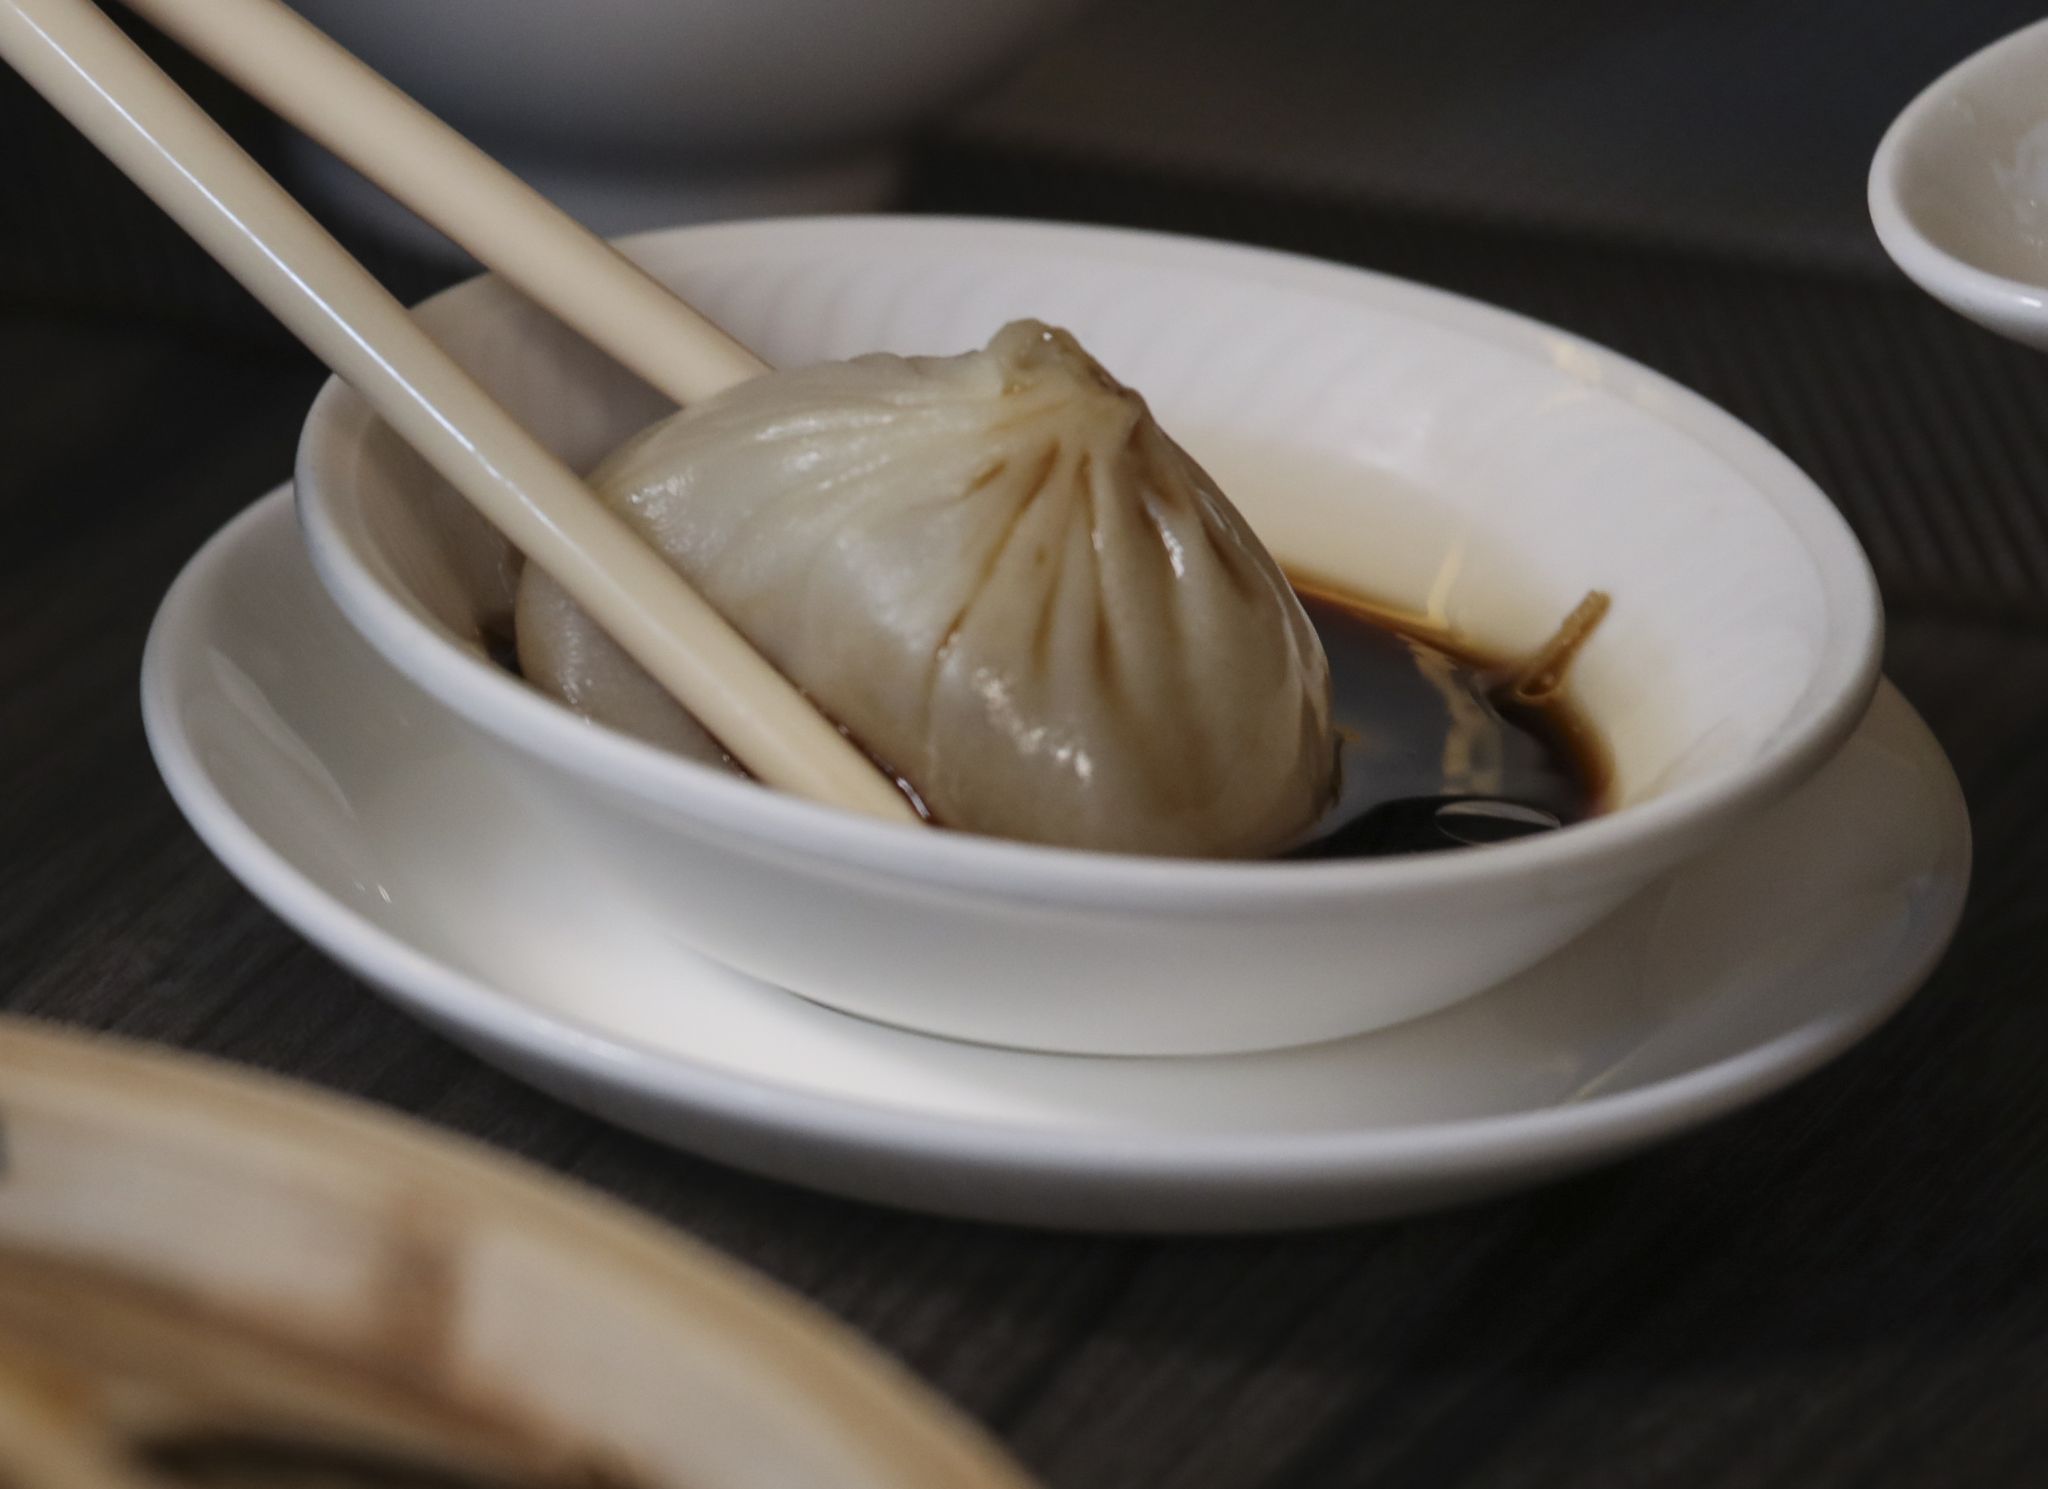 Bring On The Steamy Buns Seattles Top Spots For Dim Sum